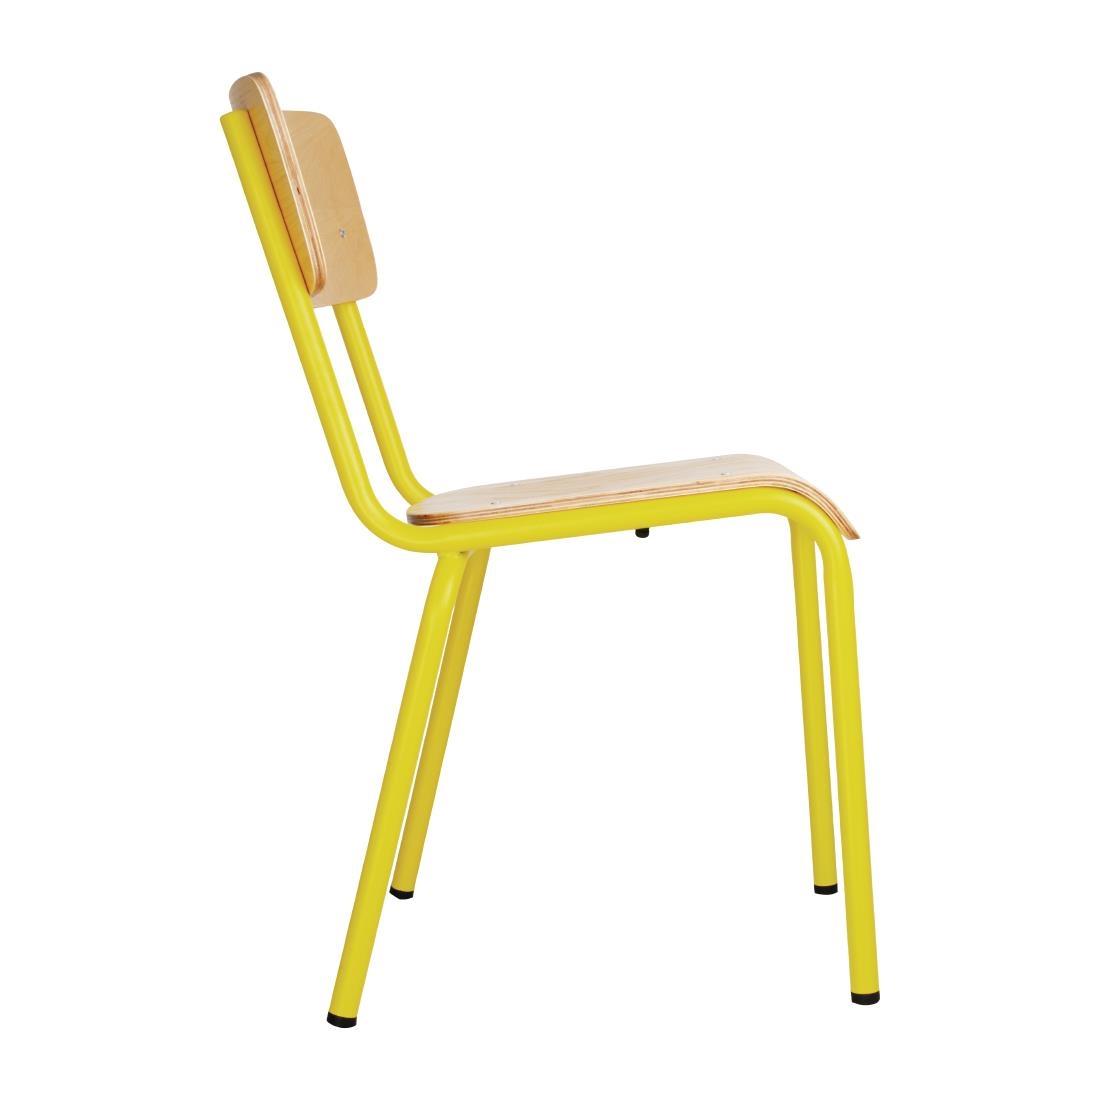 Bolero Cantina Side Chairs with Wooden Seat Pad and Backrest Yellow (Pack of 4) - FB948  - 2